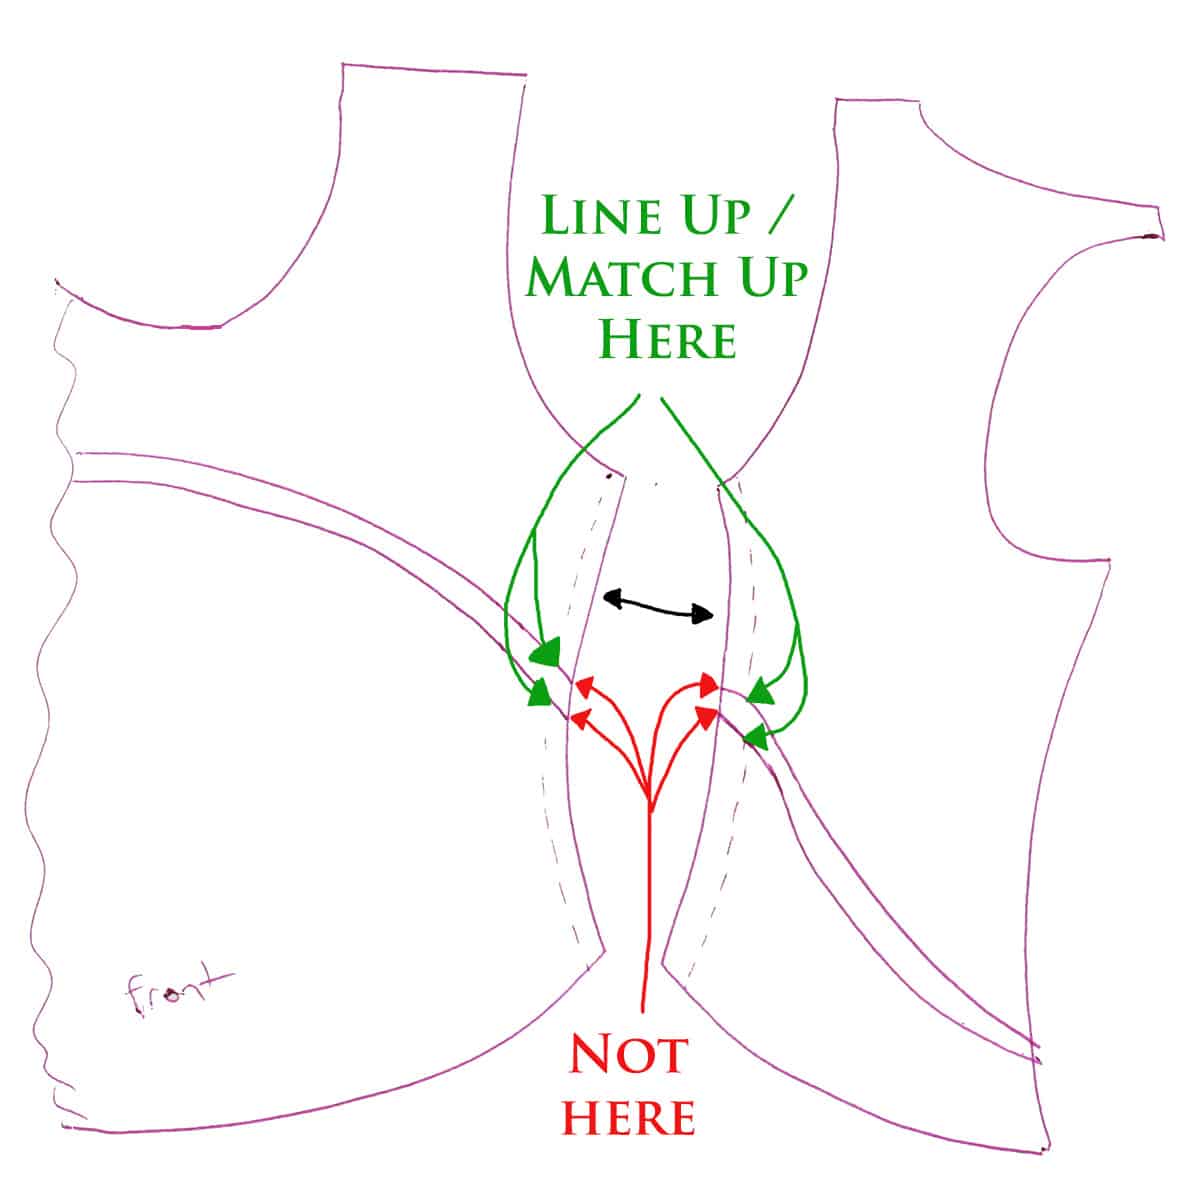 A rough sketched diagram showing a front and back pattern piece, with red and green arrows pointing at different areas.